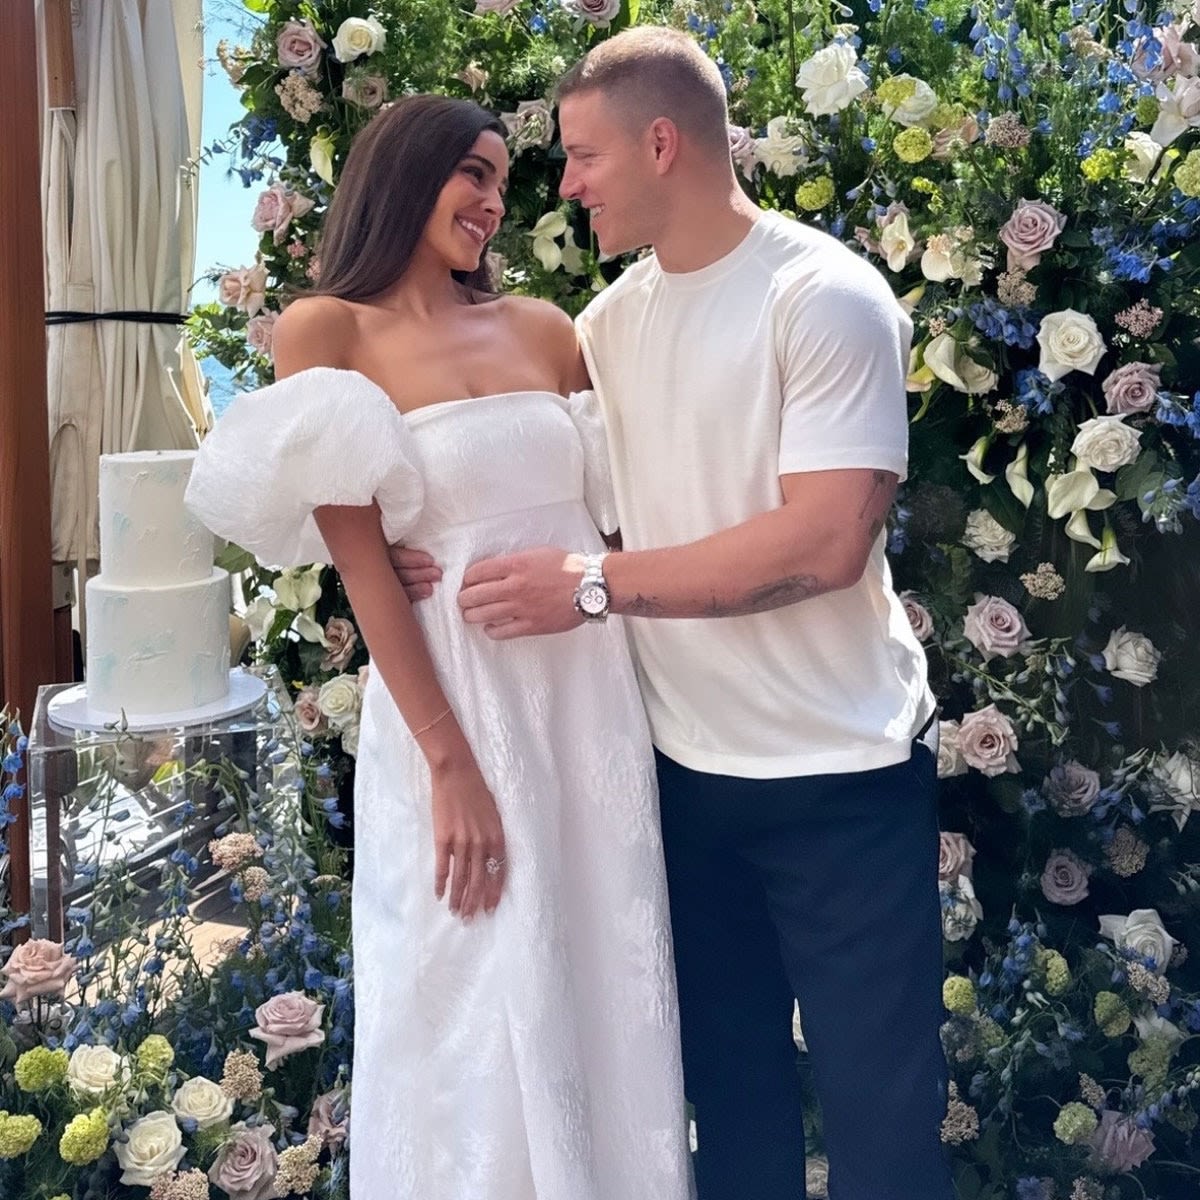 Why Olivia Culpo Didn't Want Her Wedding Dress to "Exude Sex"